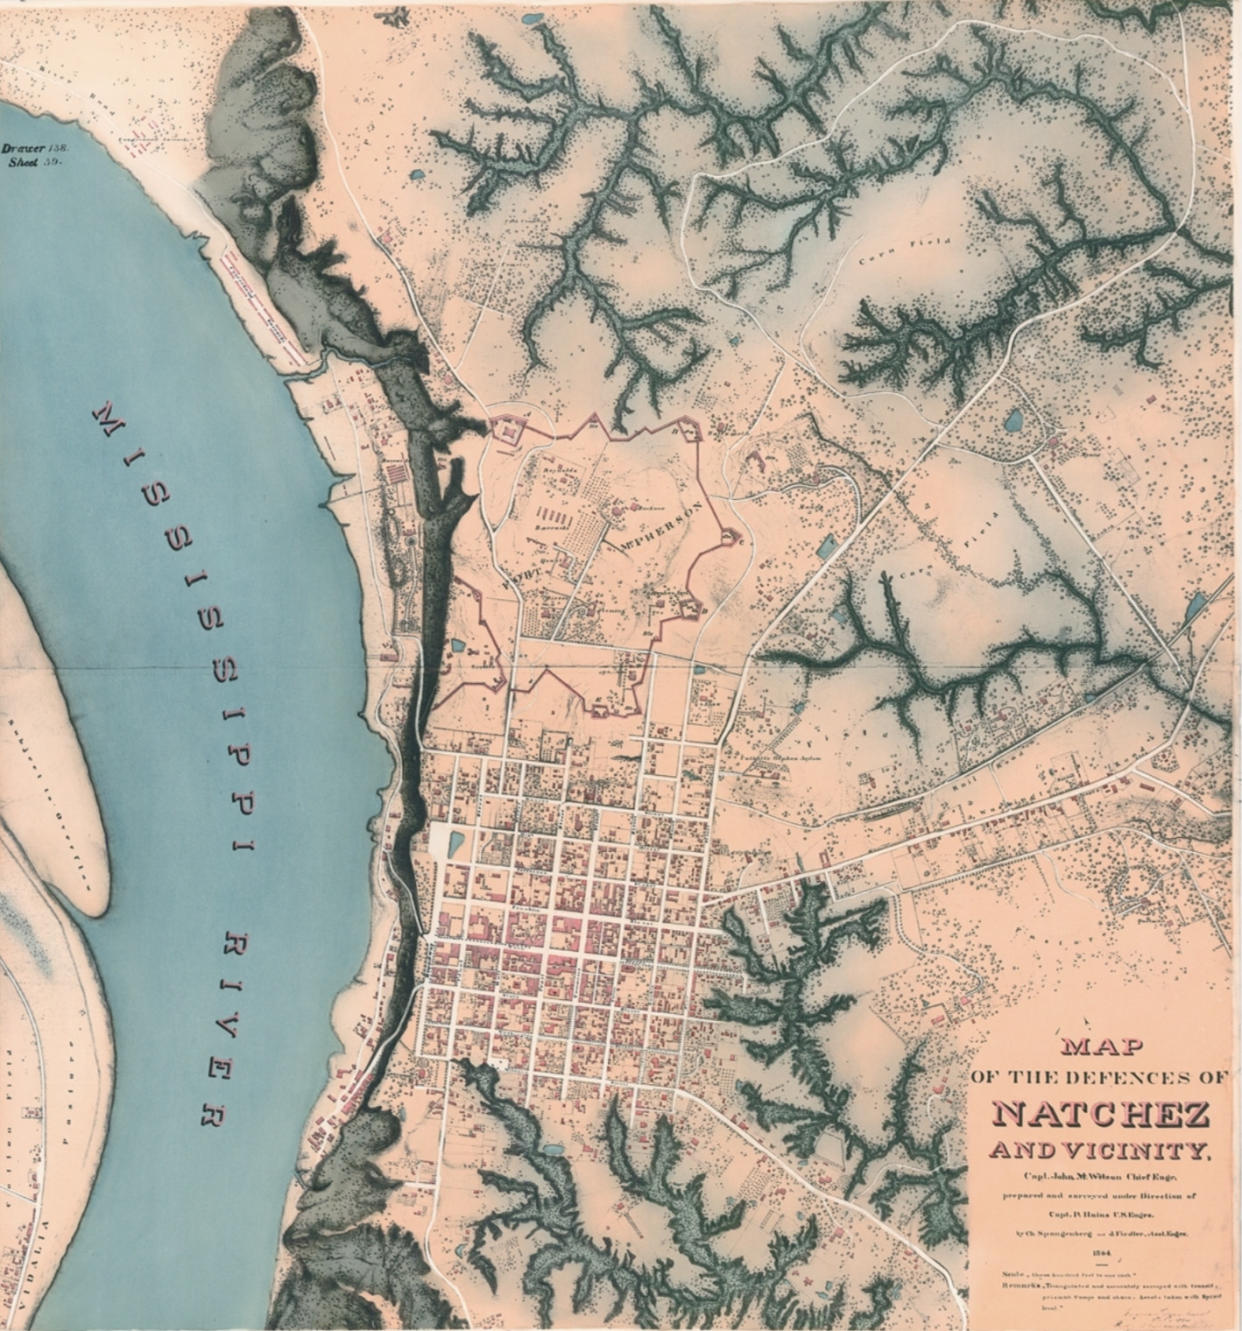 An engraving titled: Map of the Defences of Natchez and vicinity.